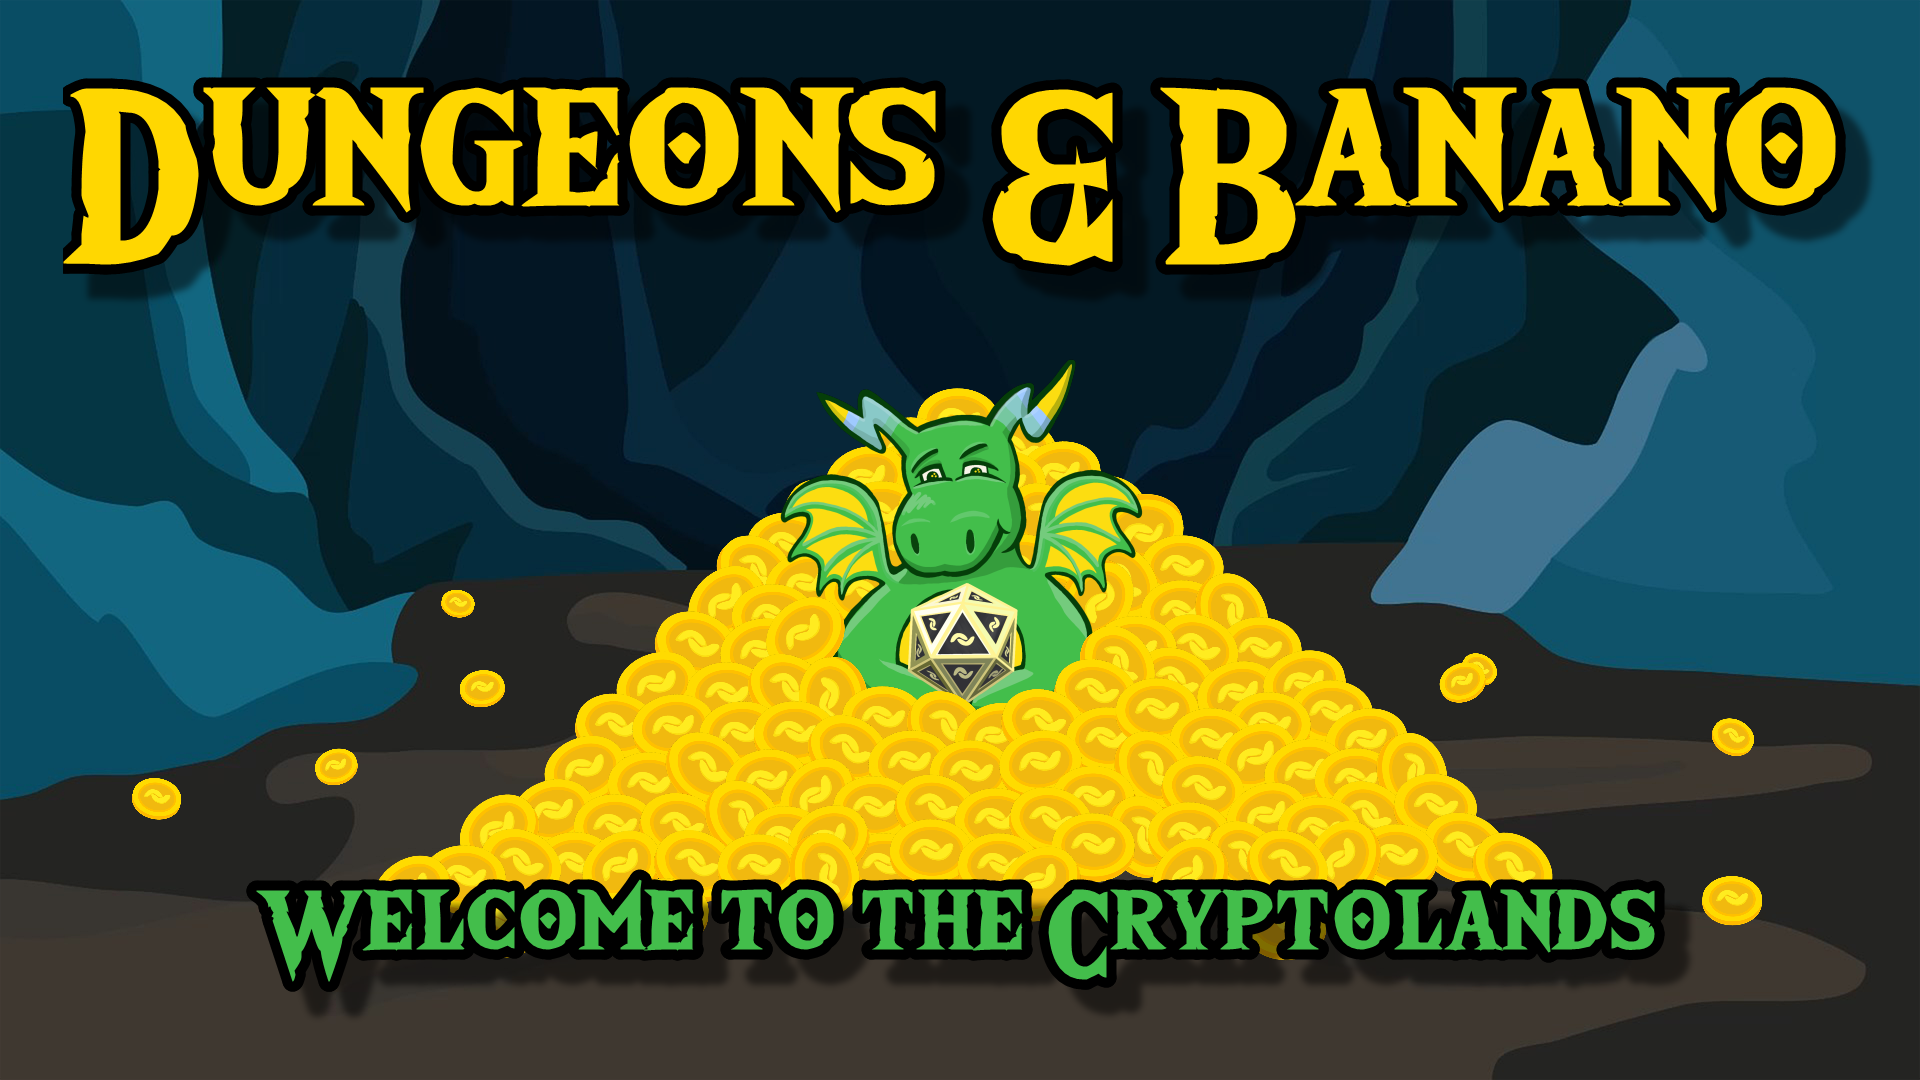 Featured BANANO Community Project: Dungeons & BANANO